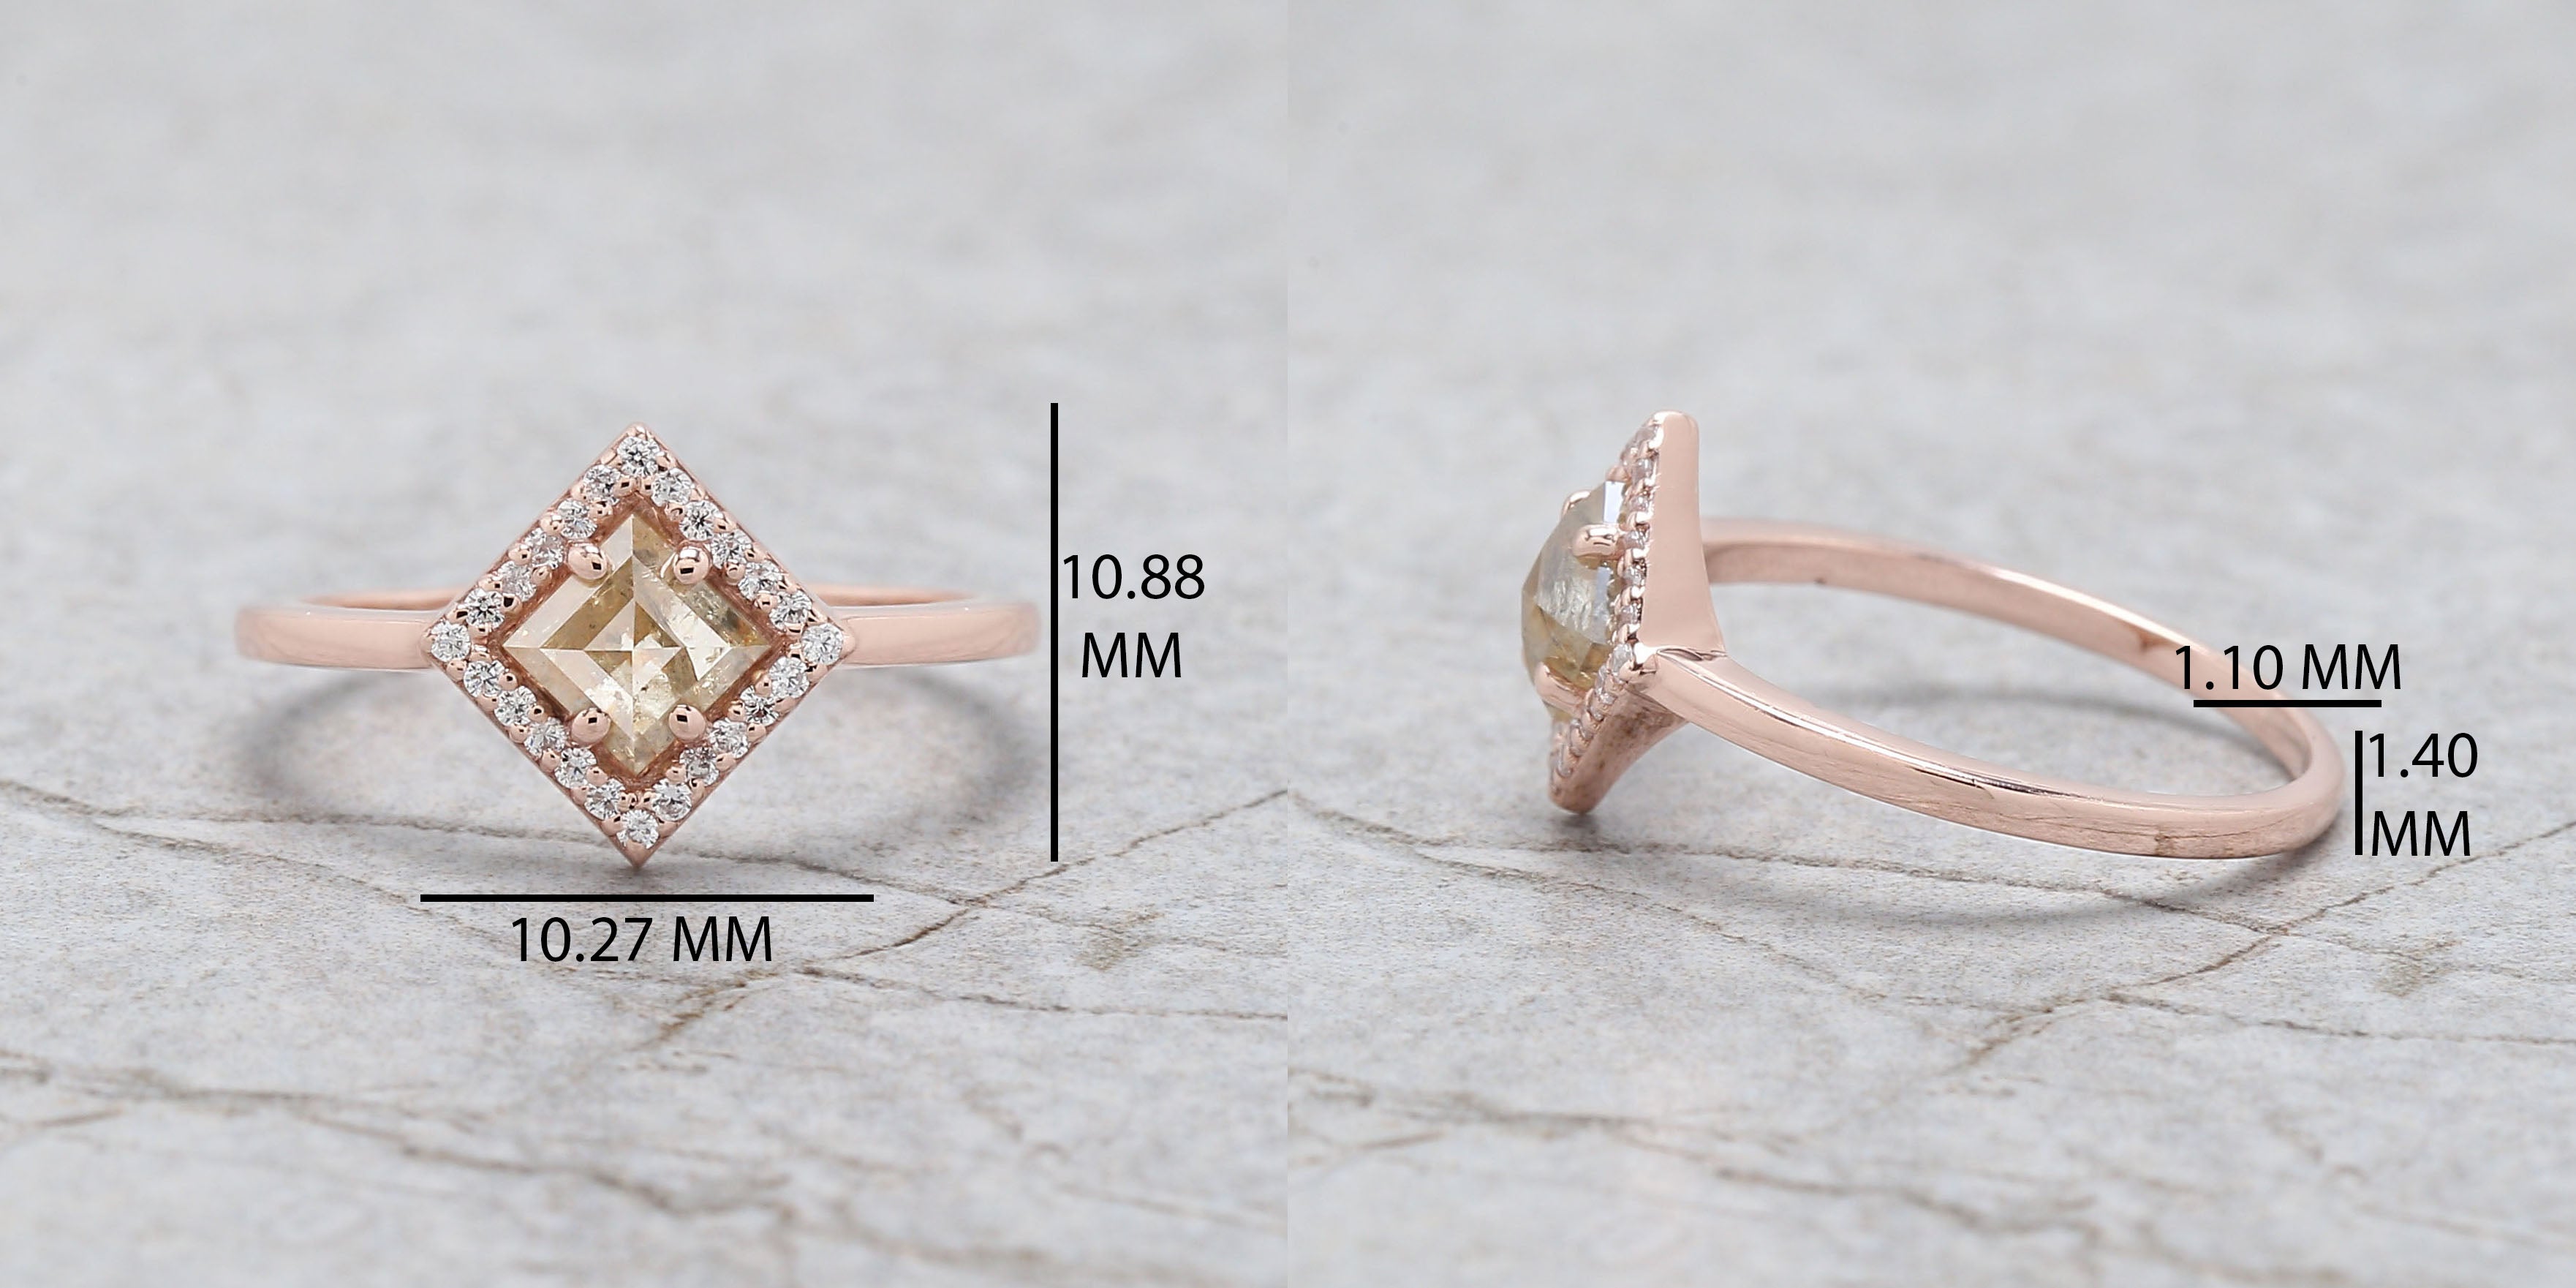 Kite Cut Yellow Color Diamond Ring 0.59 Ct 6.30 MM Kite Diamond Ring 14K Solid Rose Gold Silver Kite Engagement Ring Gift For Her QL9235